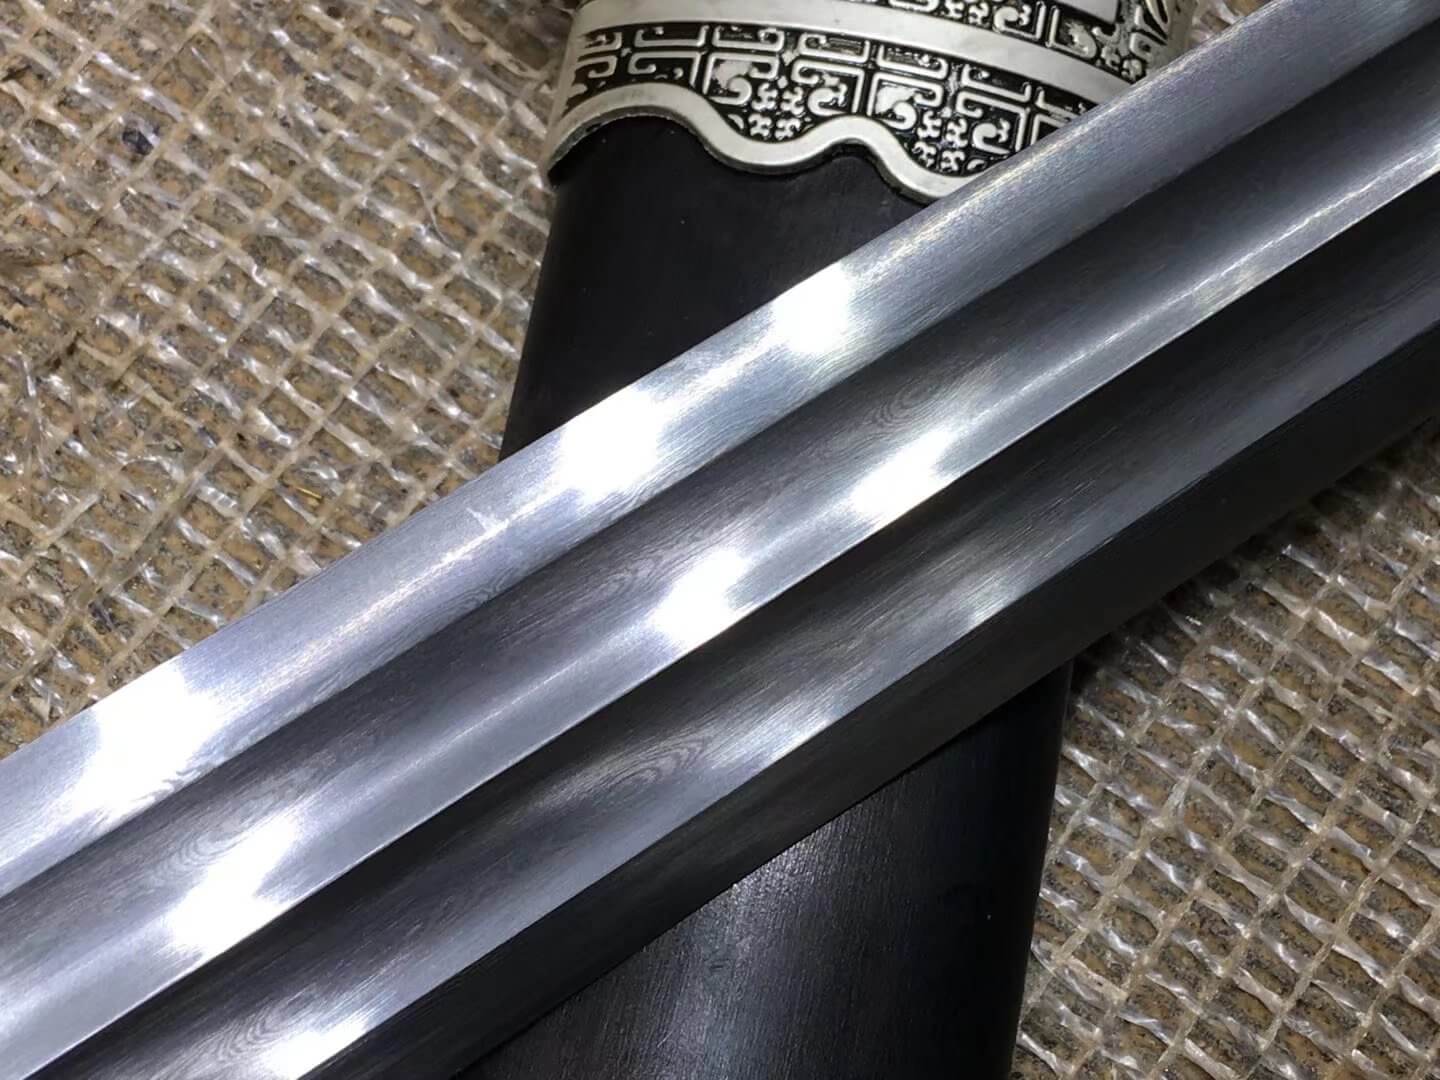 Yuewang sword,Damascus steel blade,Black scabbard,Alloy fittings,Length 32" - Chinese sword shop